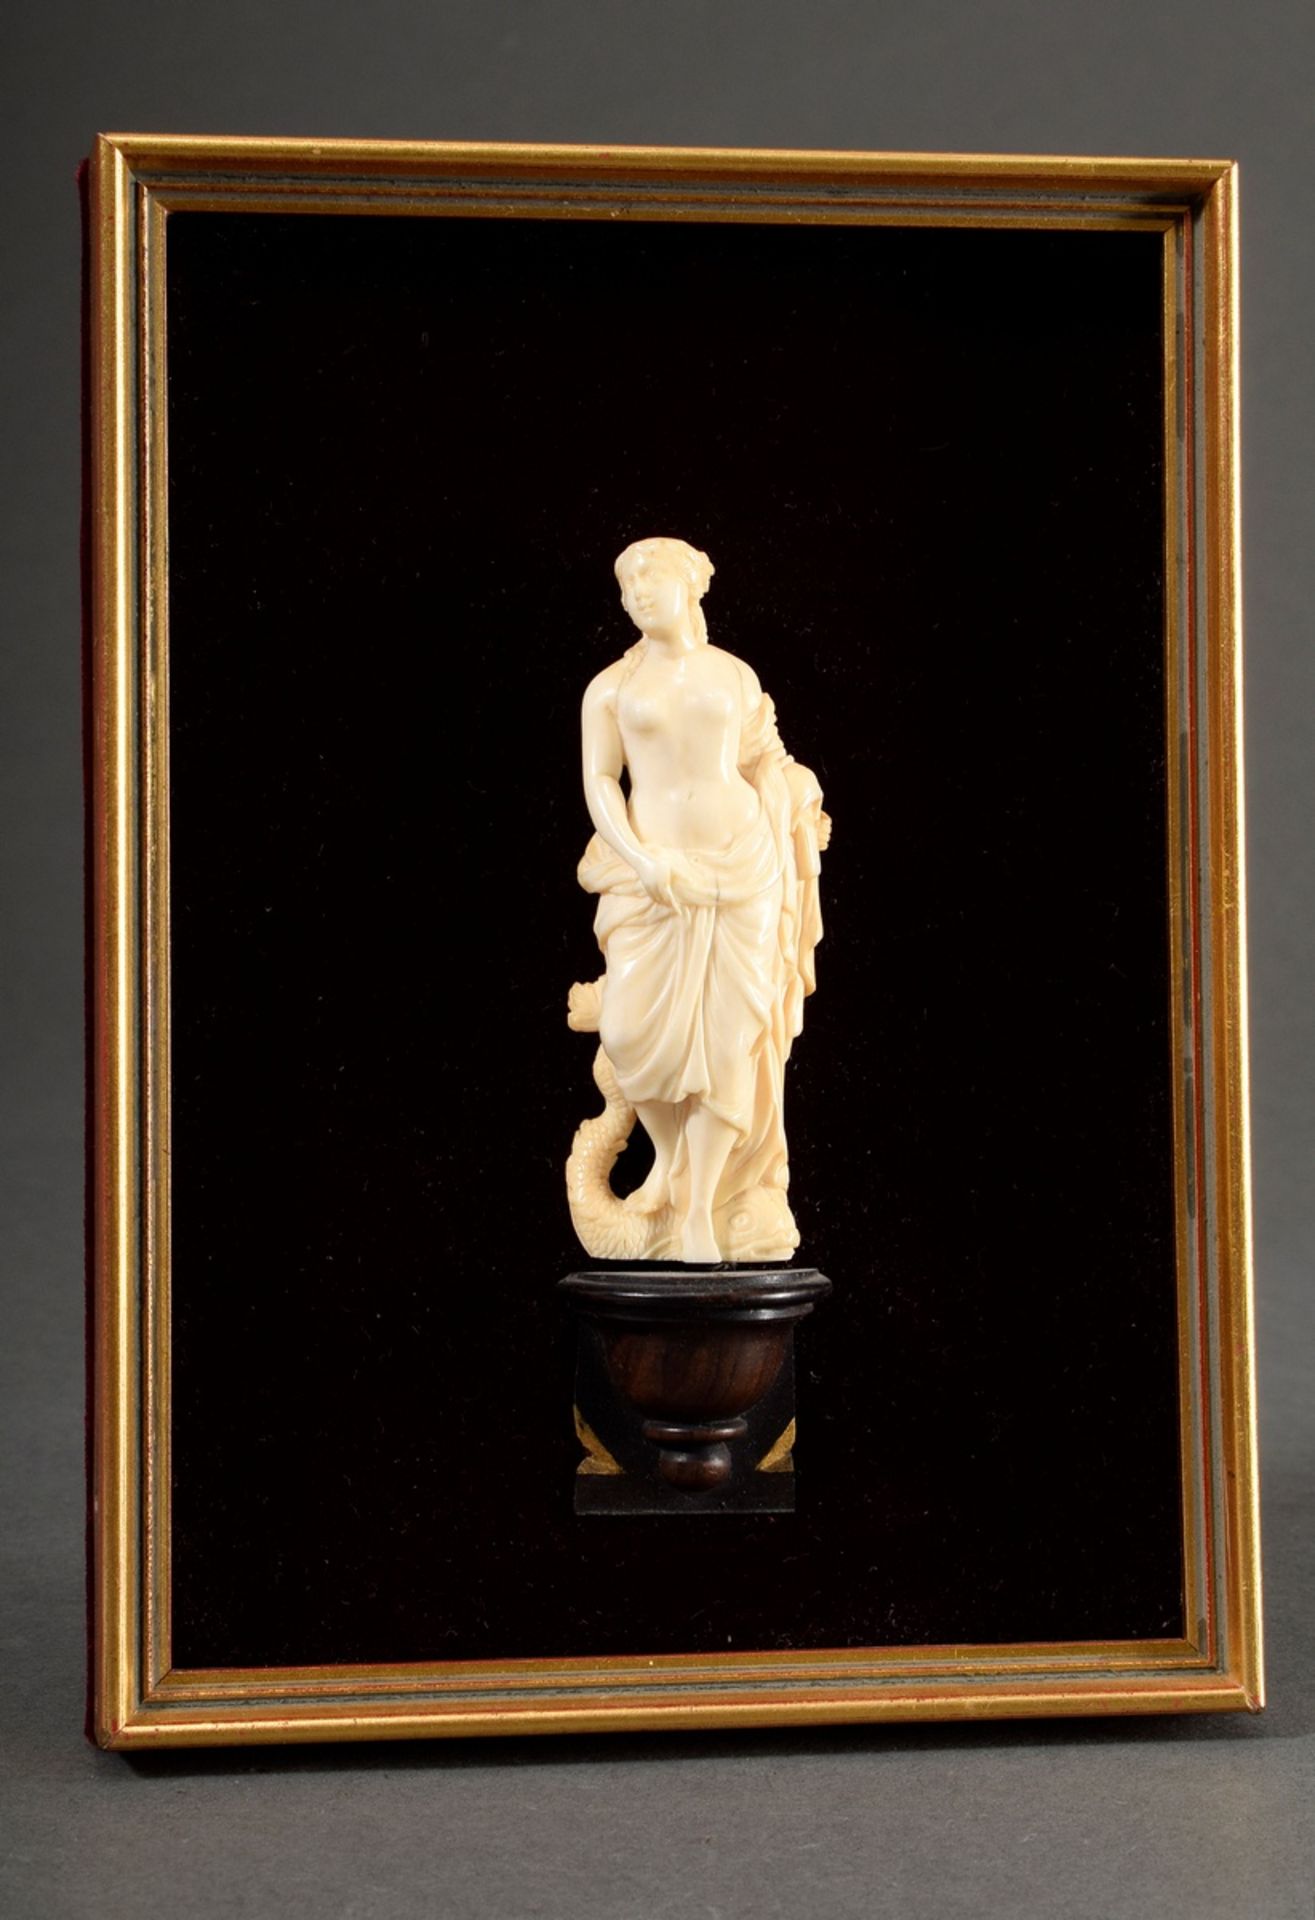 Small ivory carving "Amphitrite" mounted on a wooden console in framing with red velvet, 19th centu